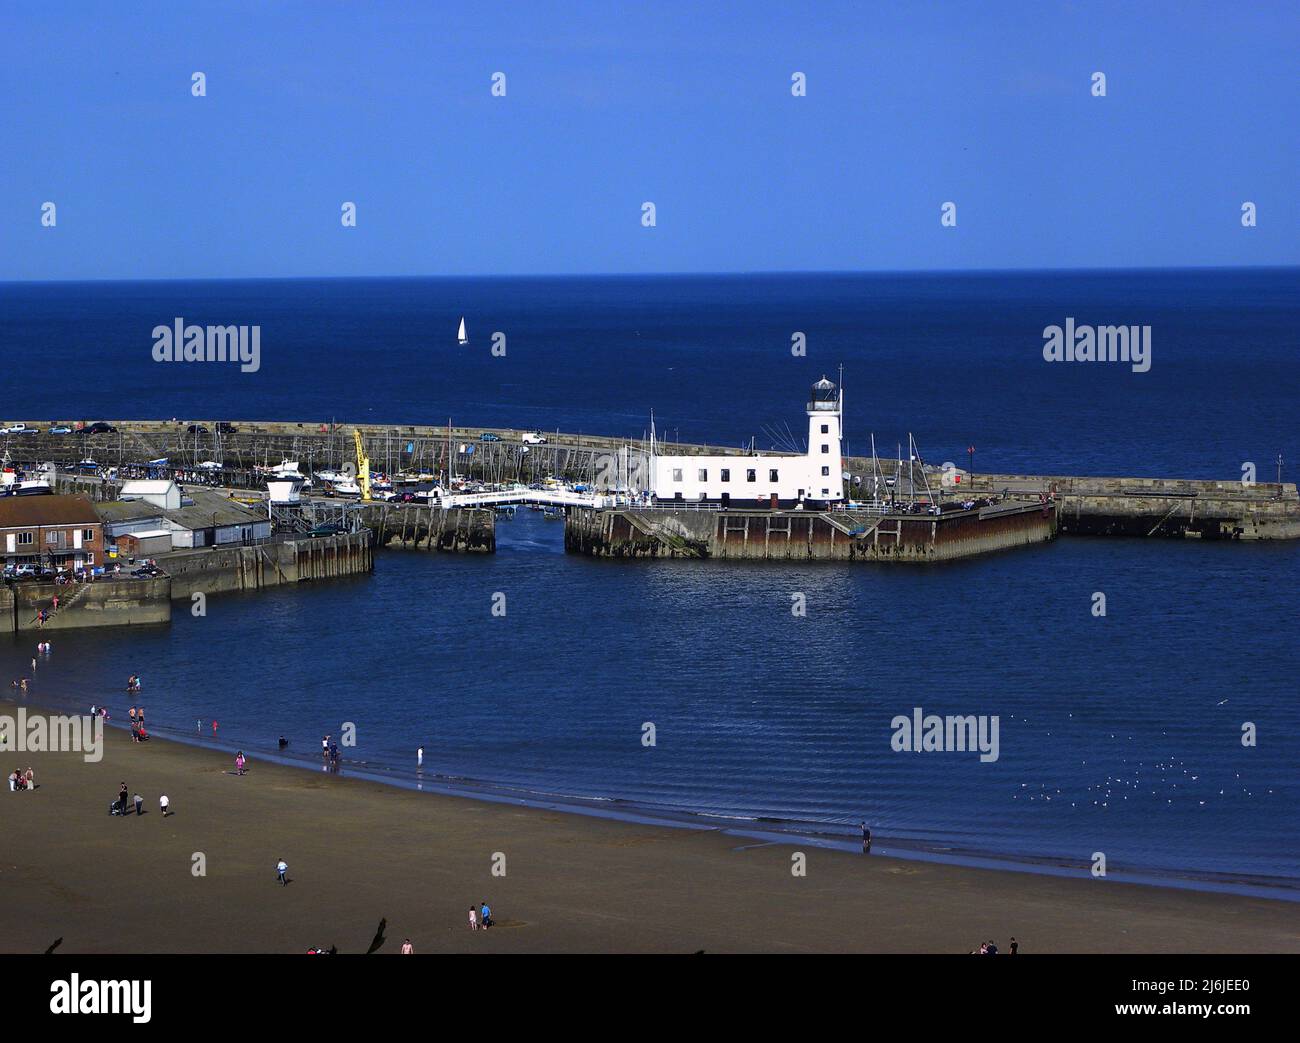 SCARBOROUGH. YORKSHIRE. ENGLAND. 03-07-10. The harbour and lighthouse at the North Yorkshire seaside resort town. Stock Photo